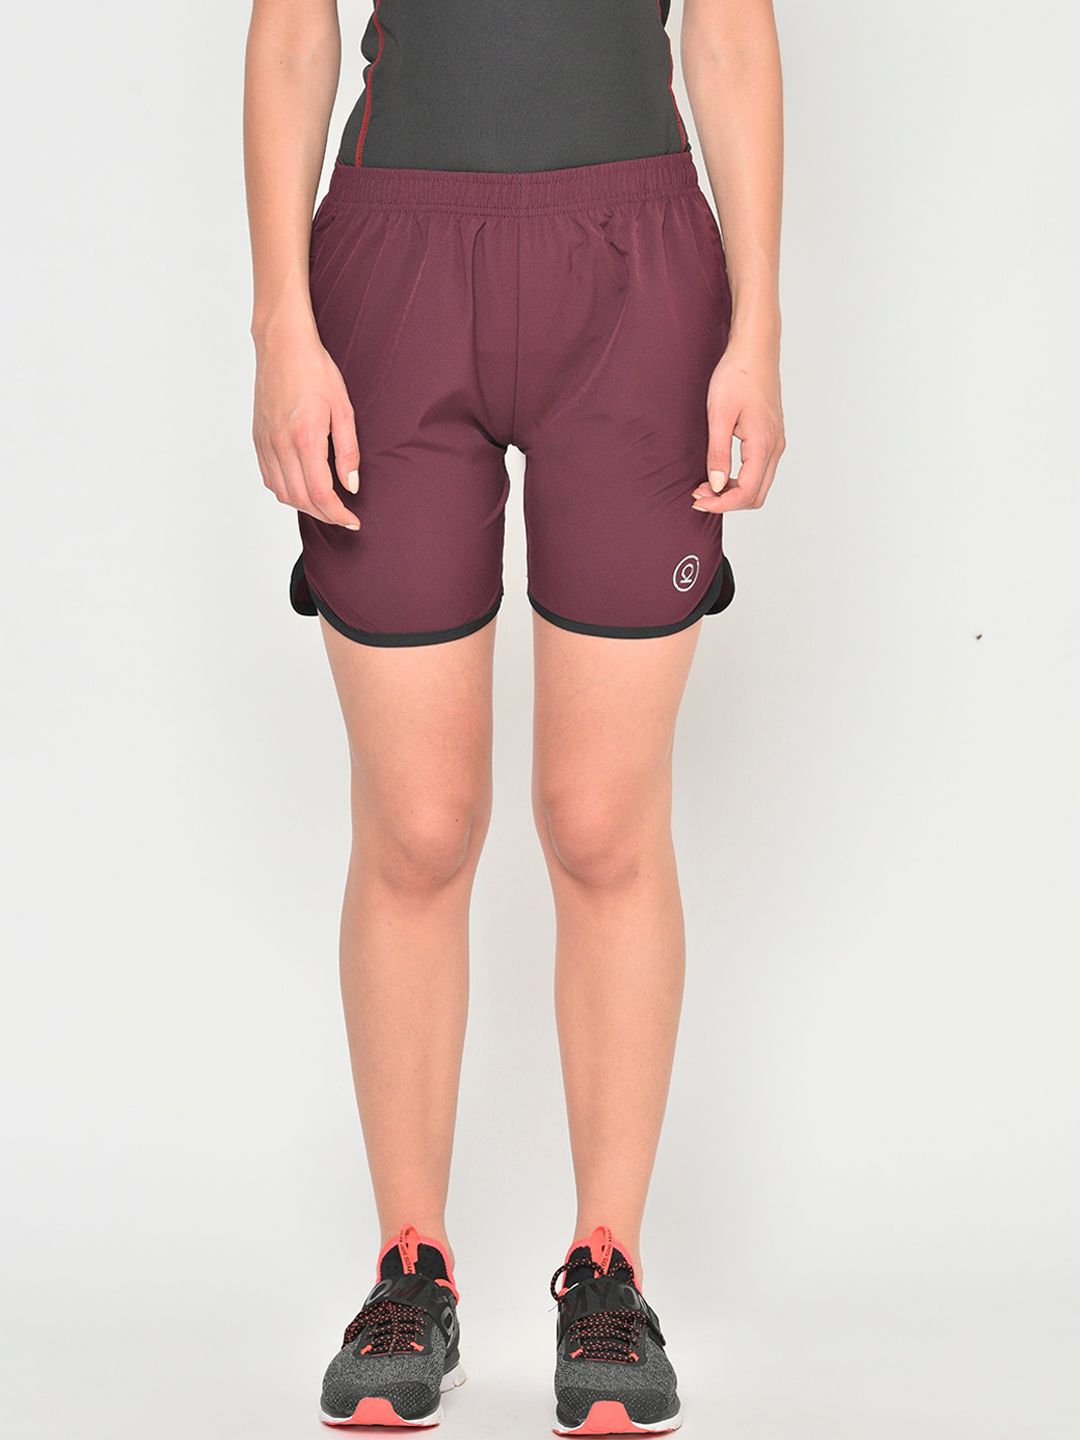 Chkokko Women Maroon Solid Regular Fit Sports Shorts Price in India